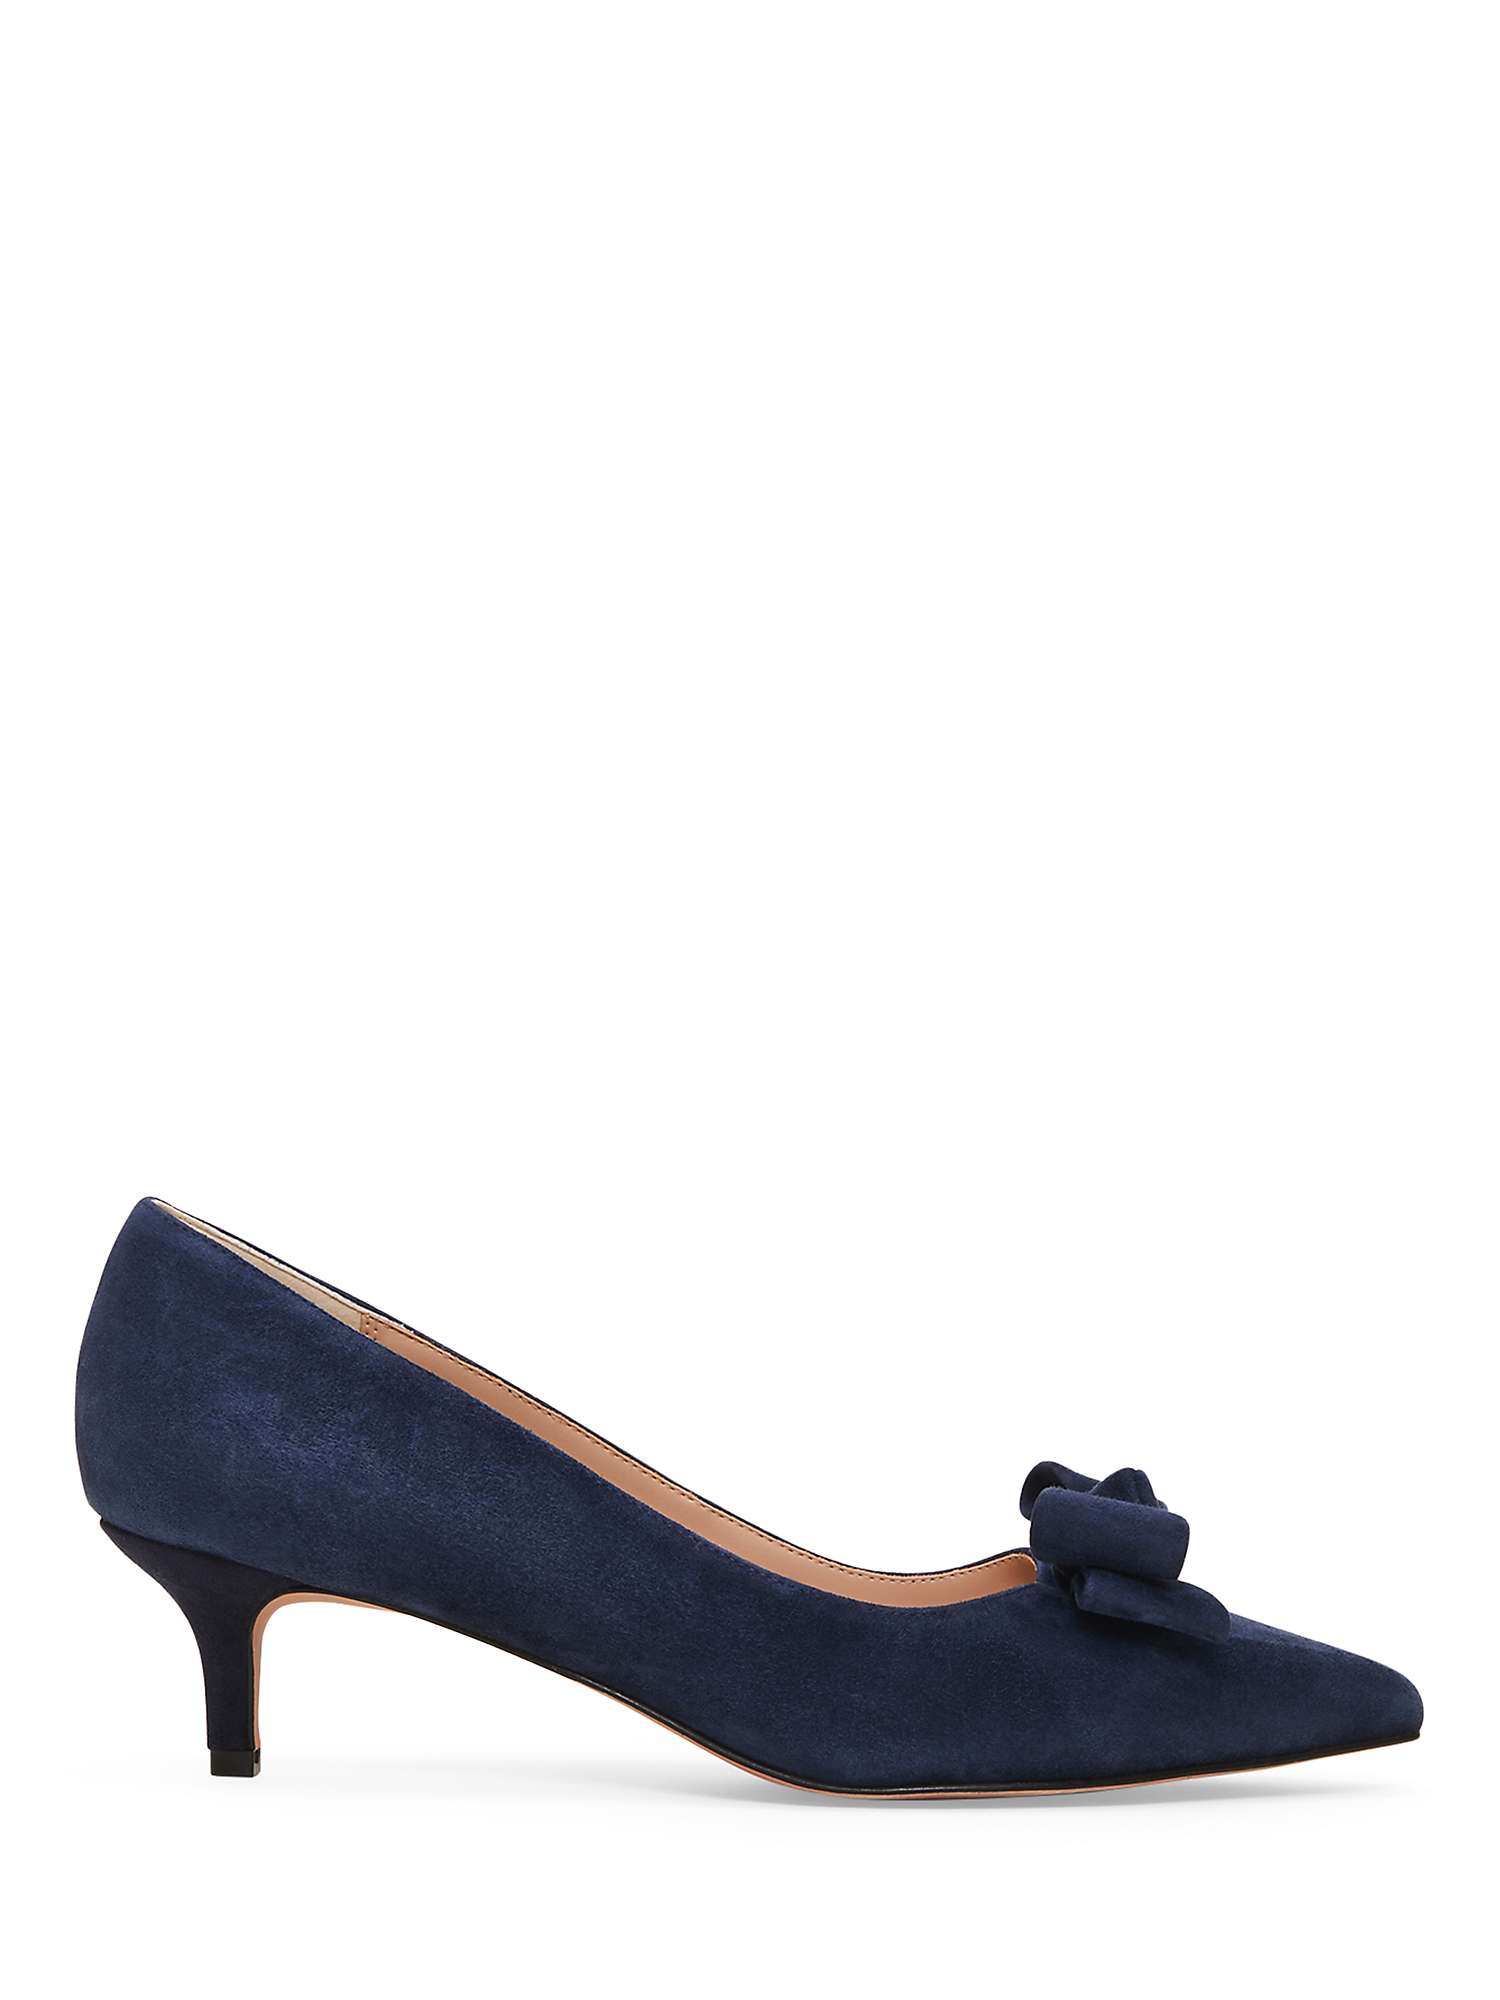 Buy Phase Eight Structured Bow Kitten Heel Shoes Online at johnlewis.com